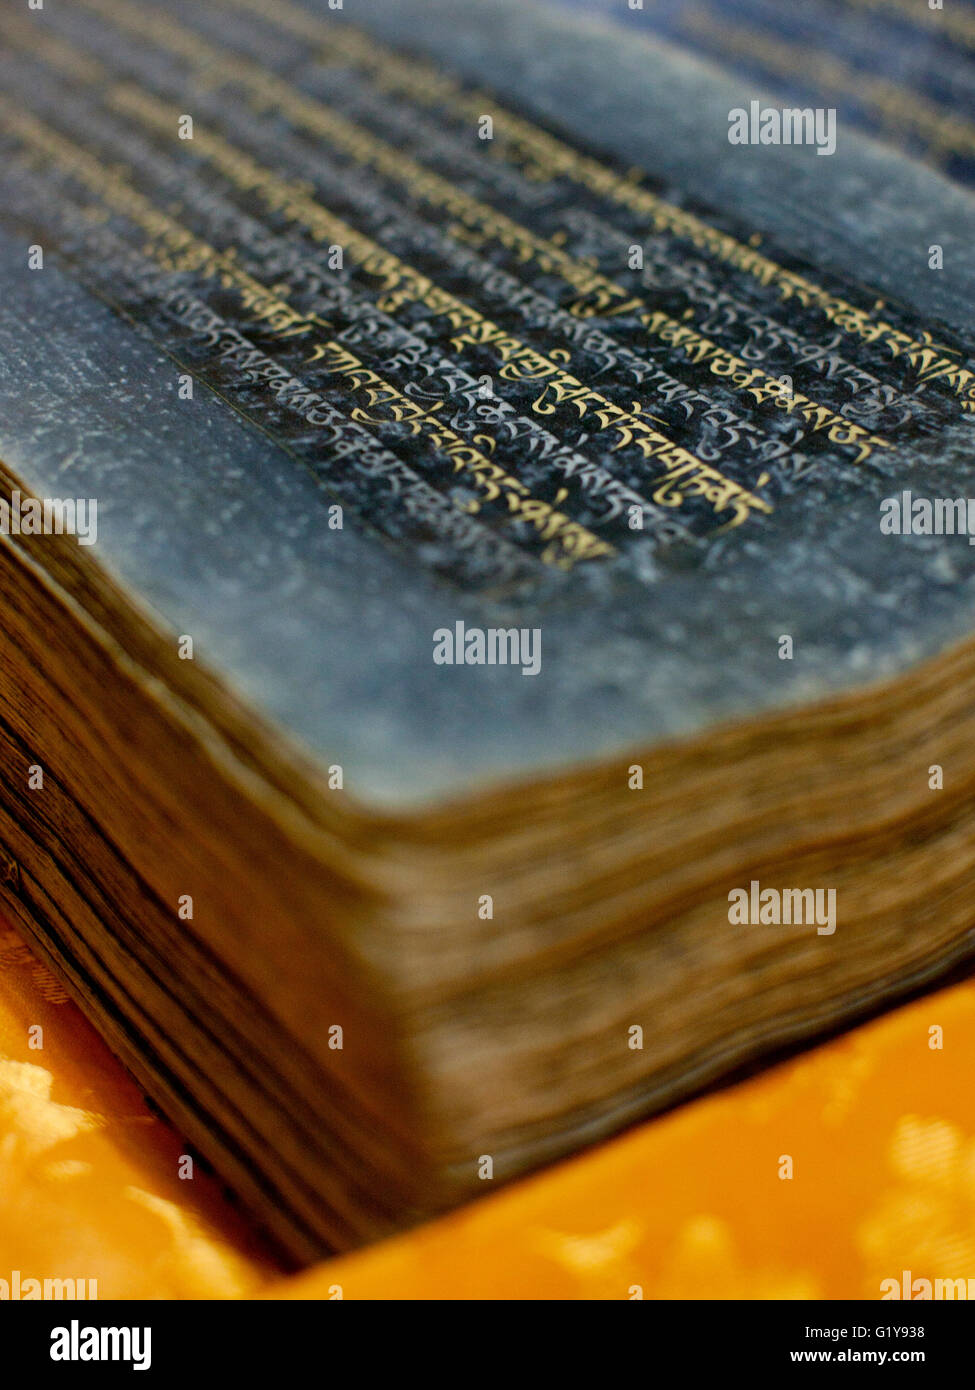 An ancient Tibetan Buddhist text from the 12th century. Stock Photo